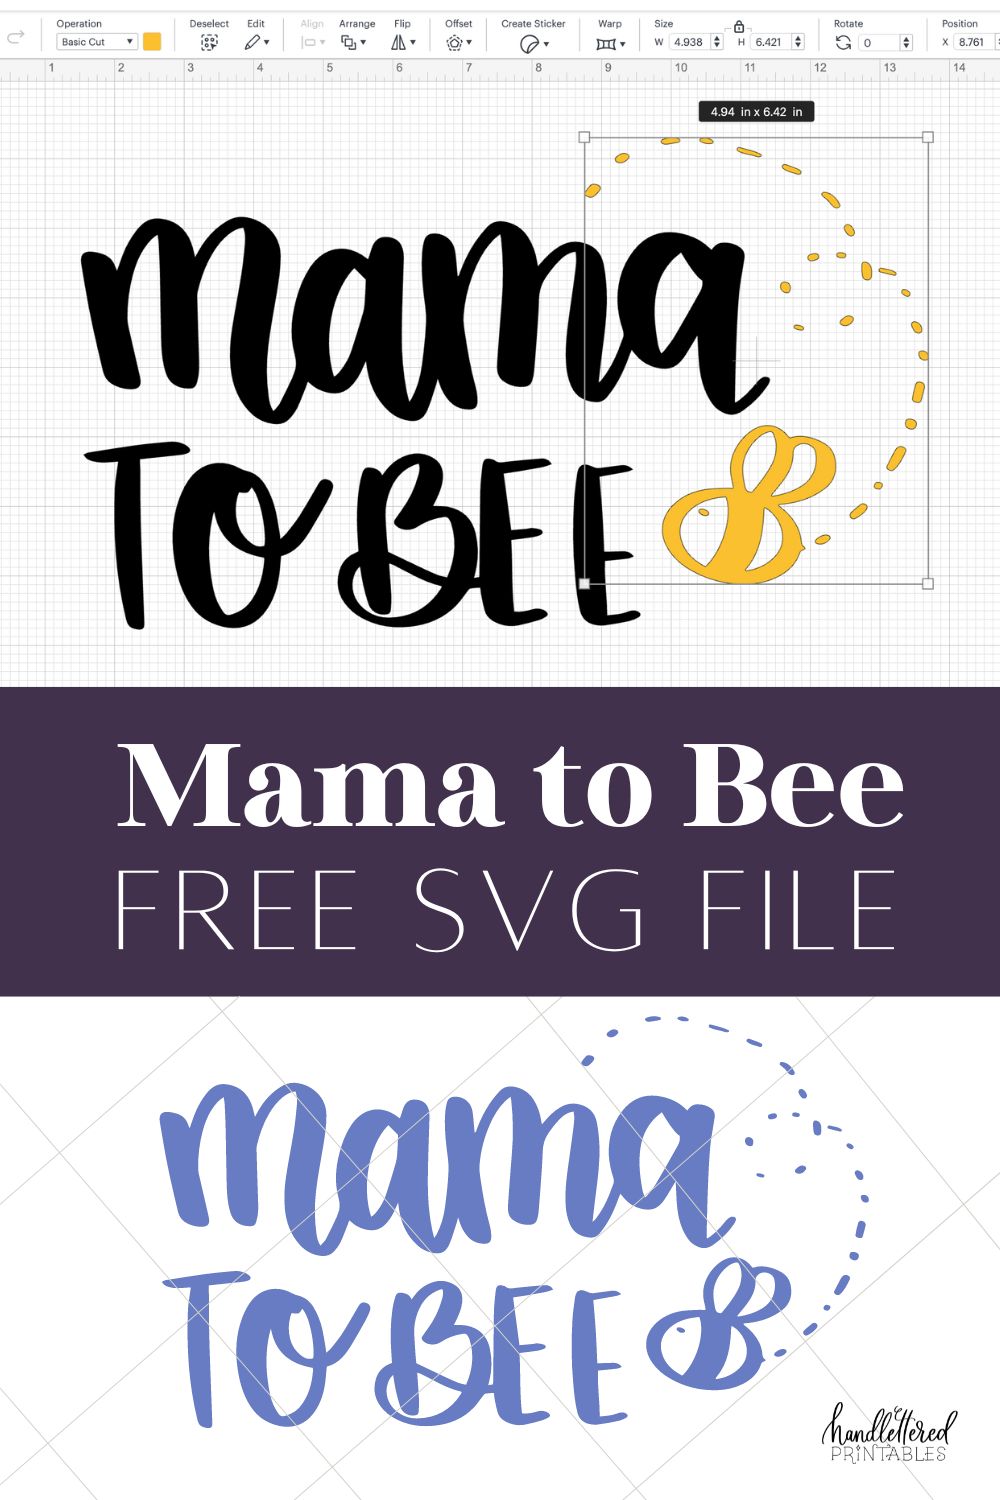 Mama to bee SVG file- free download, shown in one solid color or uploaded to Cricut design space with the bee turned yellow